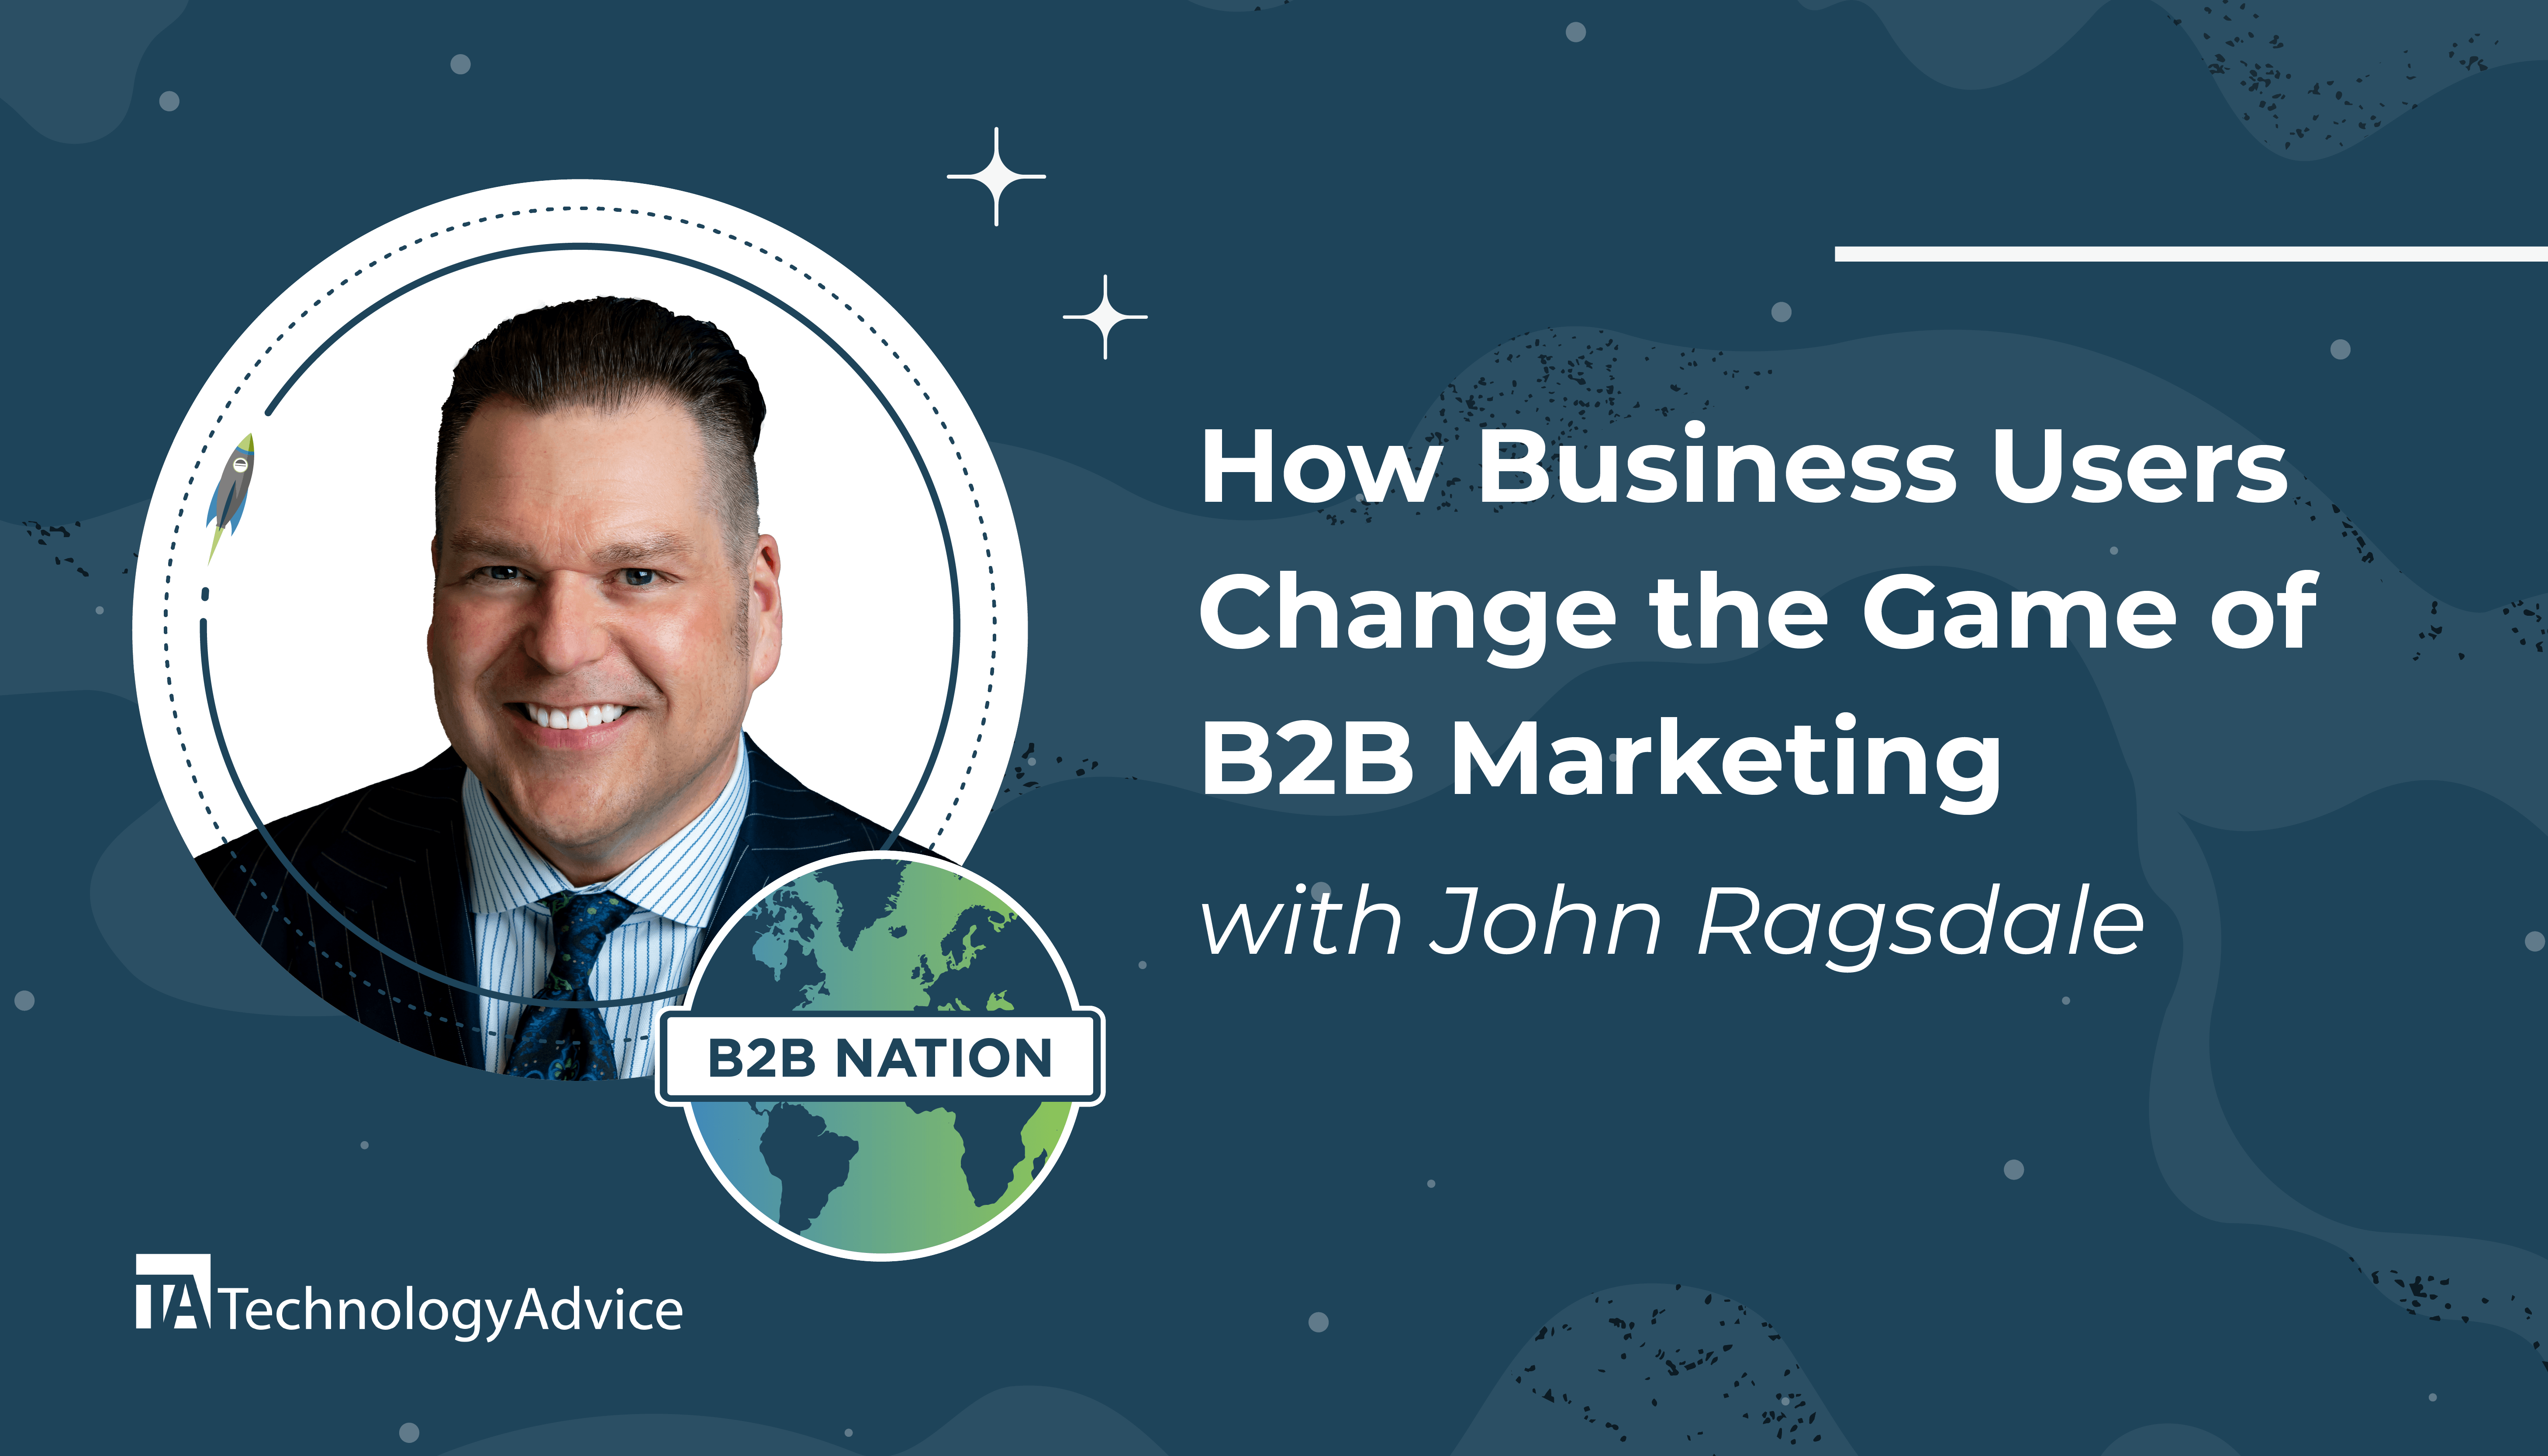 John Ragsdale of TSIA discusses how business users are changing B2B marketing on the B2B Nation podcast.